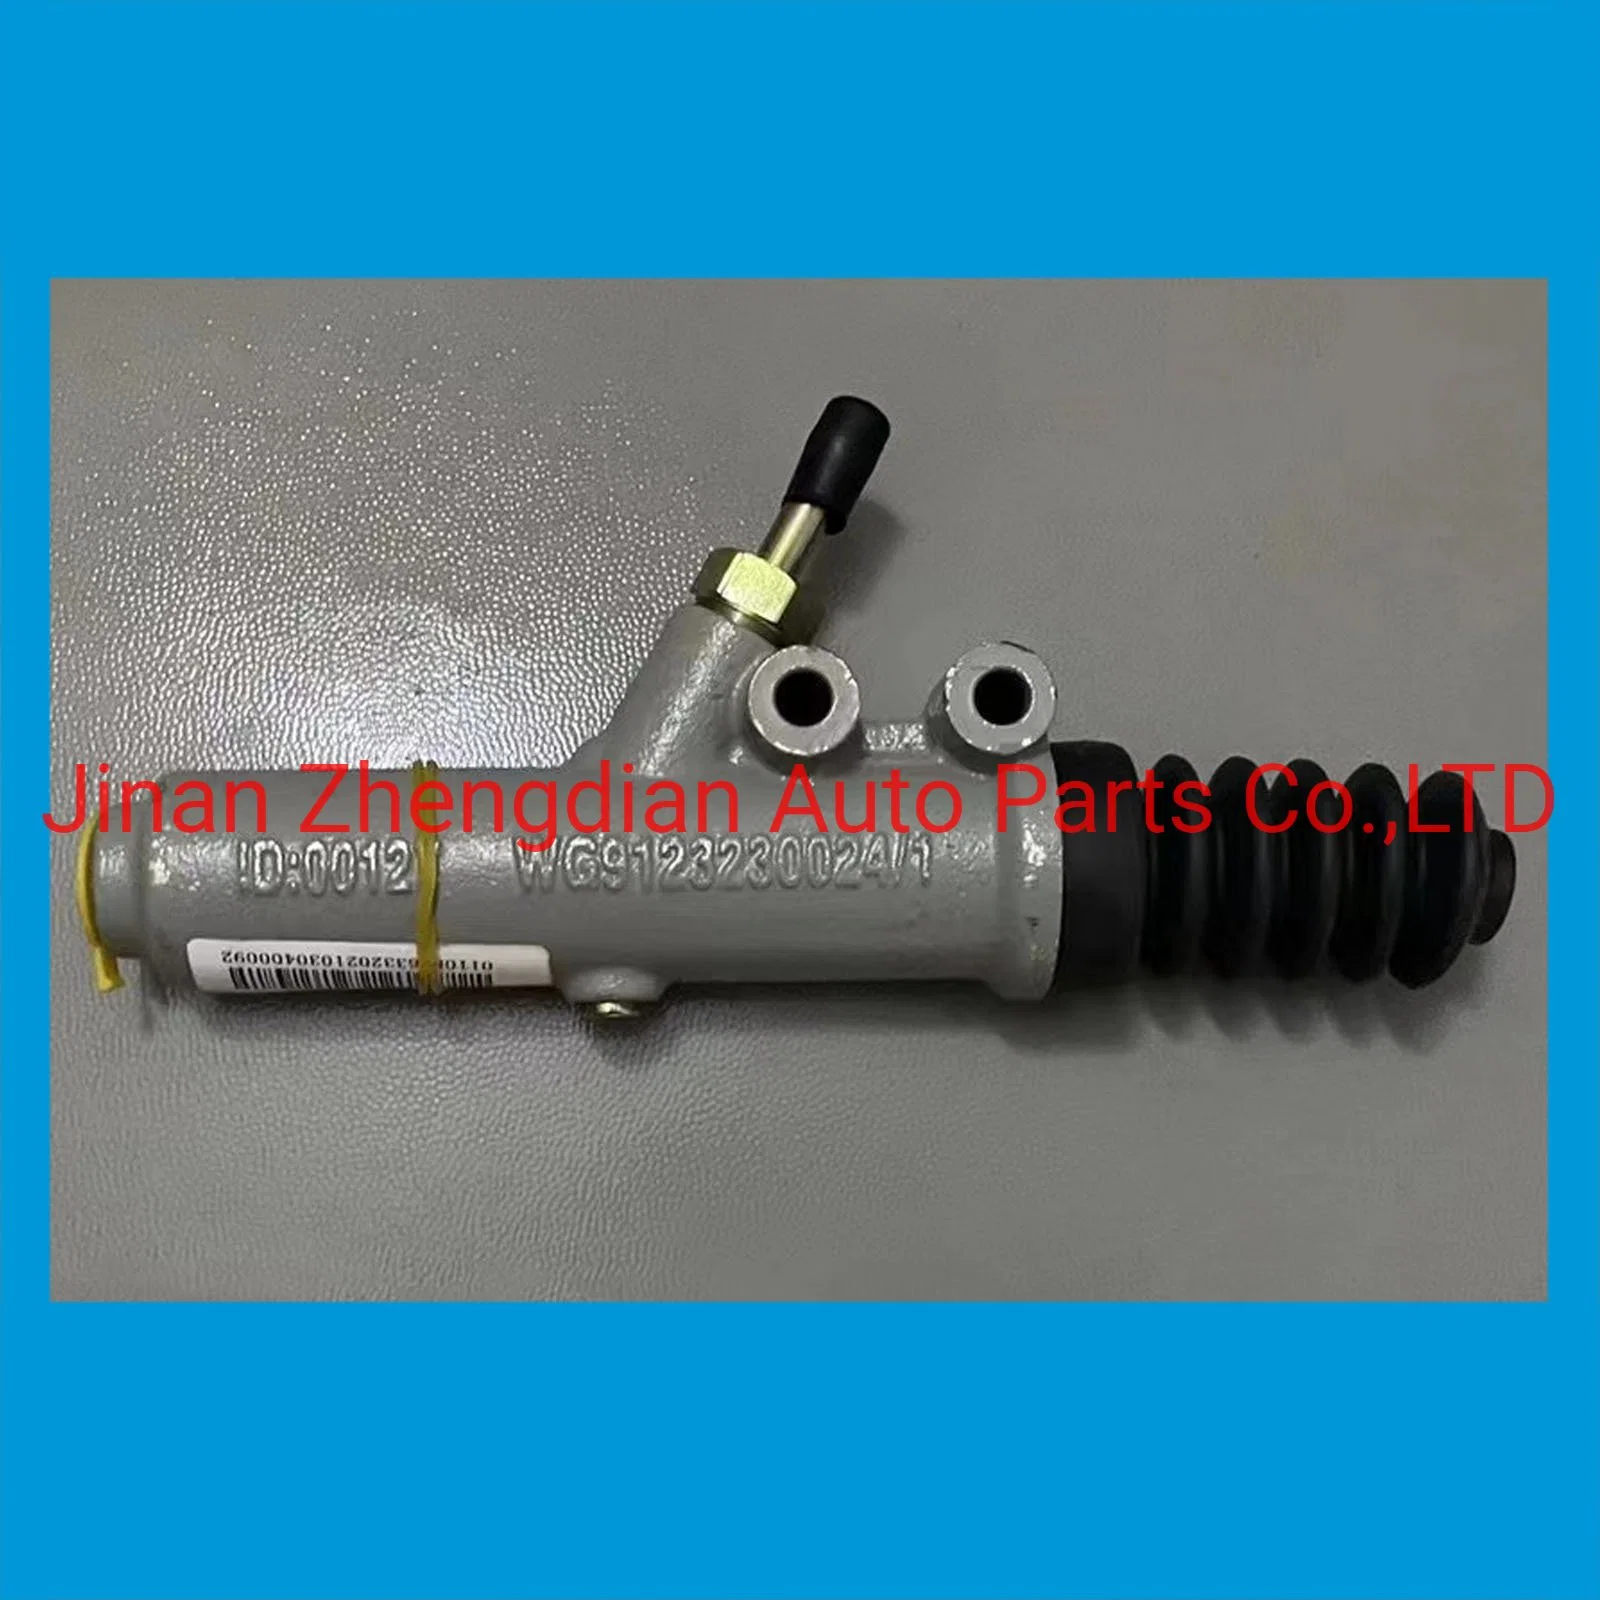 Wg9925230540 Clutch Master Cylinder for Sinotruk T7h Steyr Sitrak Beiben Shacman FAW Foton Auman Camc Hongyan Dongfeng Truck Spare Parts